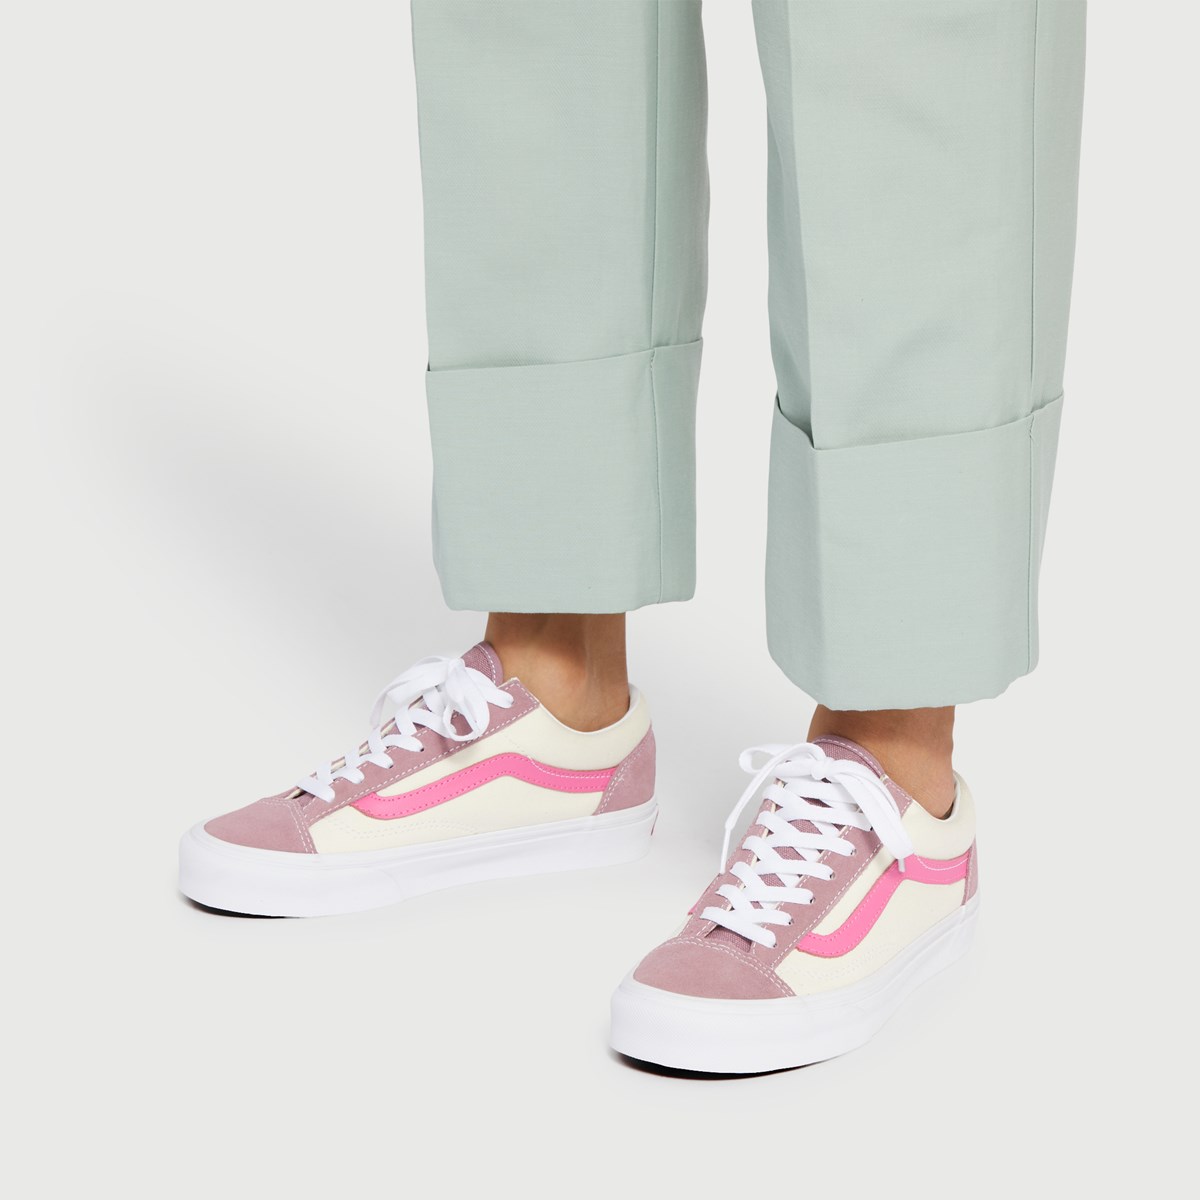 Purchase \u003e pink vans style, Up to 77% OFF